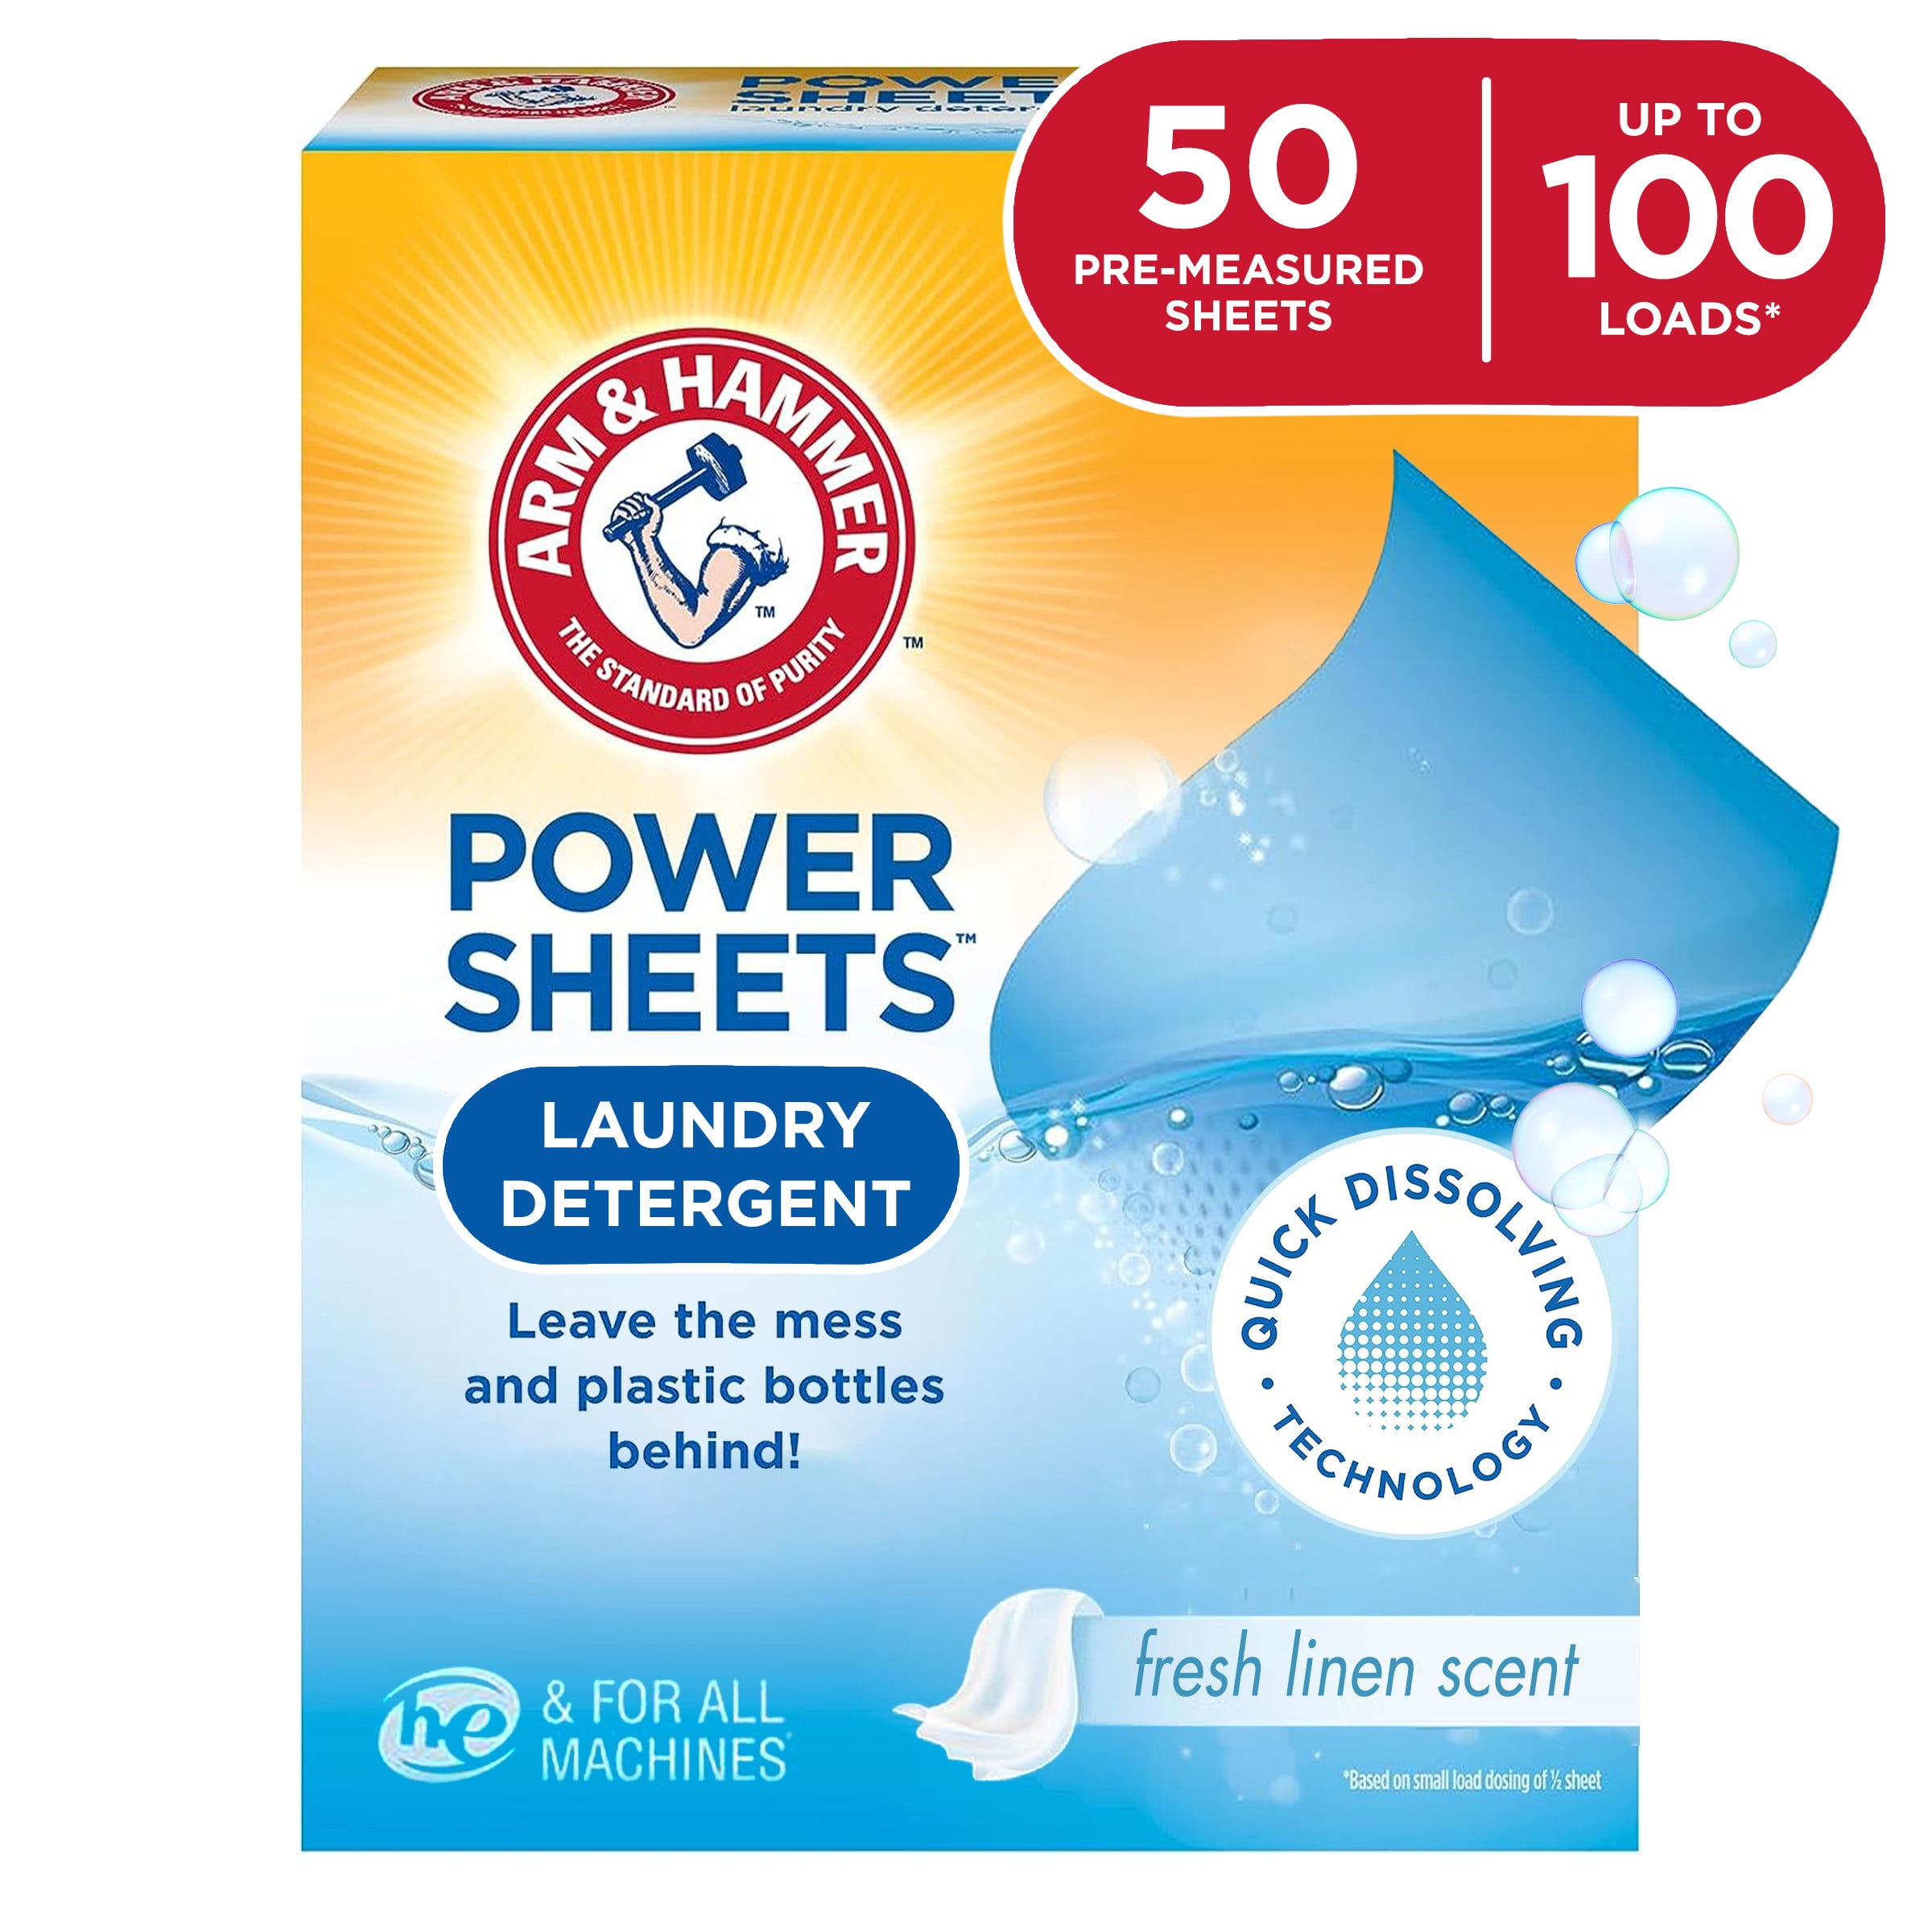 Earth Breeze - Laundry Detergent Sheets, Liquidless Technology - Fresh  Scent (120 Loads) - Same Clean, No Mess - No Plastic Jug (Pack of 2) 60  Sheets